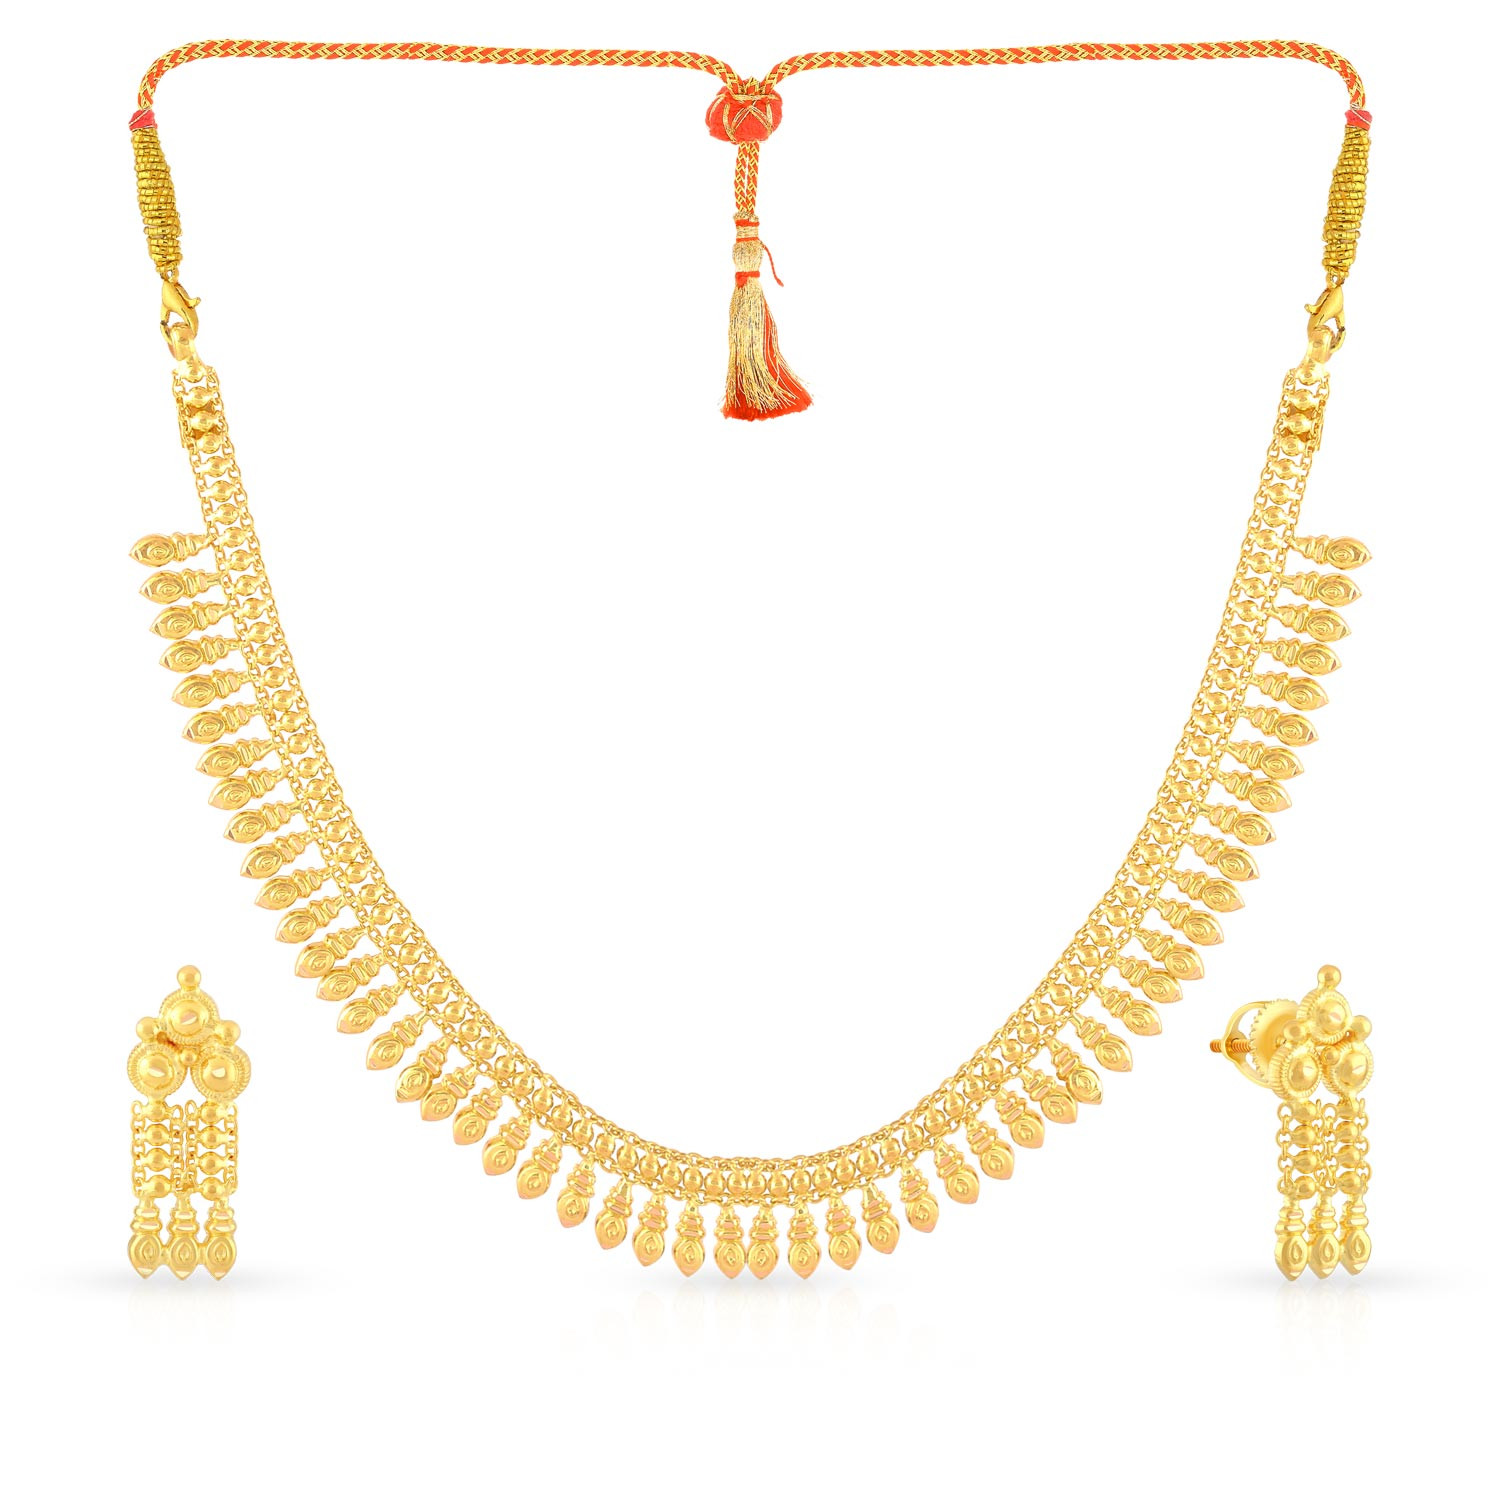 Kerala Jewellers Gold Haram design with price - South India Jewels